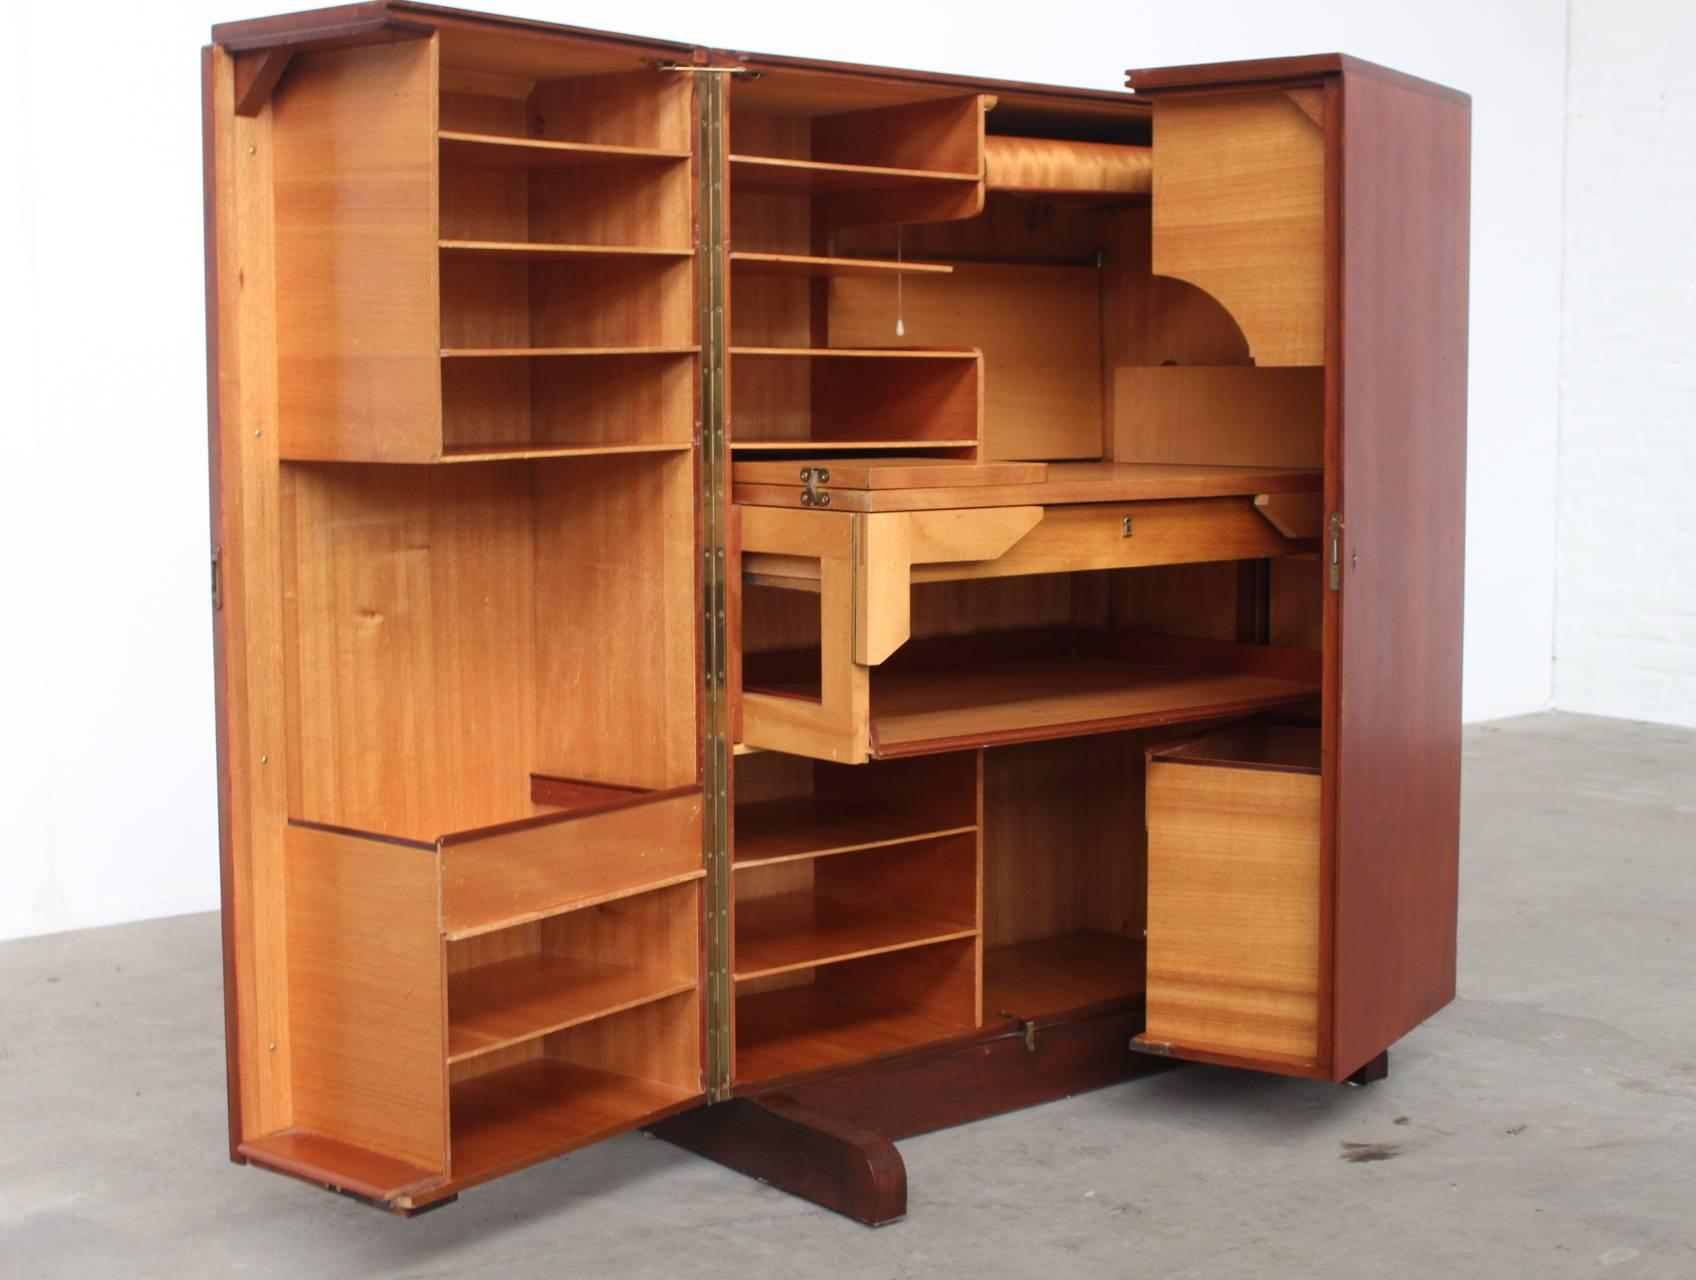 Amazing completely (un)foldable multi functional desk secretary with countless retractable shelves, drawers and boxes and a build-in light over the desk top. This is a unique and rare to find piece nick-named the 